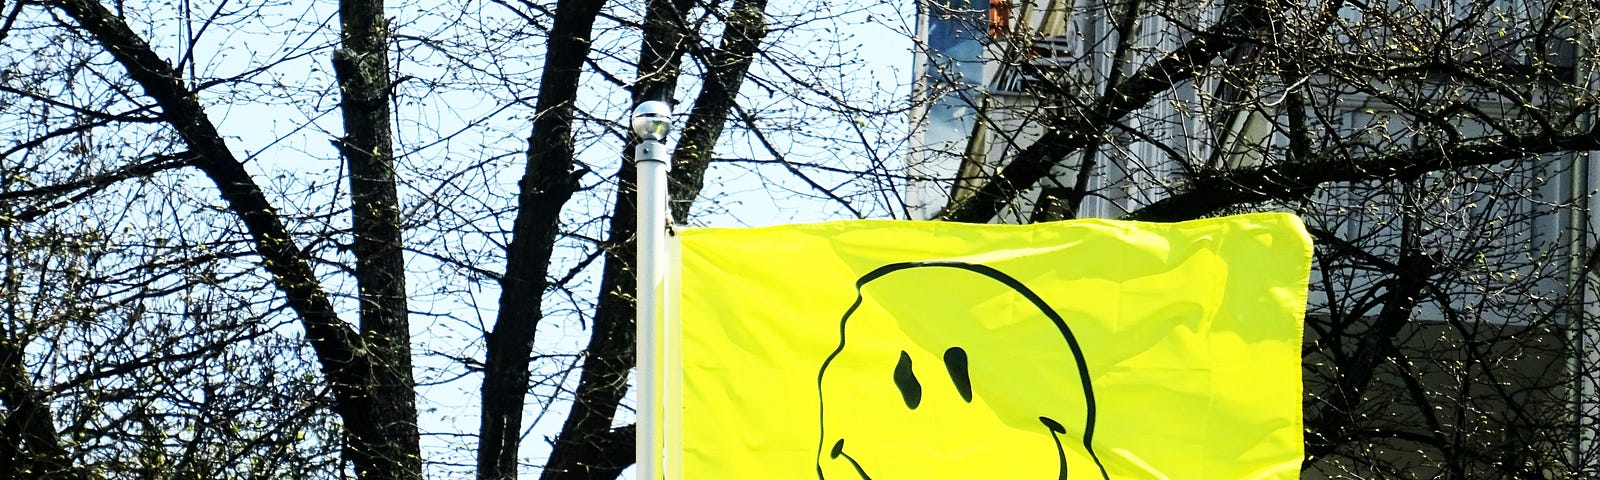 A smiley face flag flies in a city street